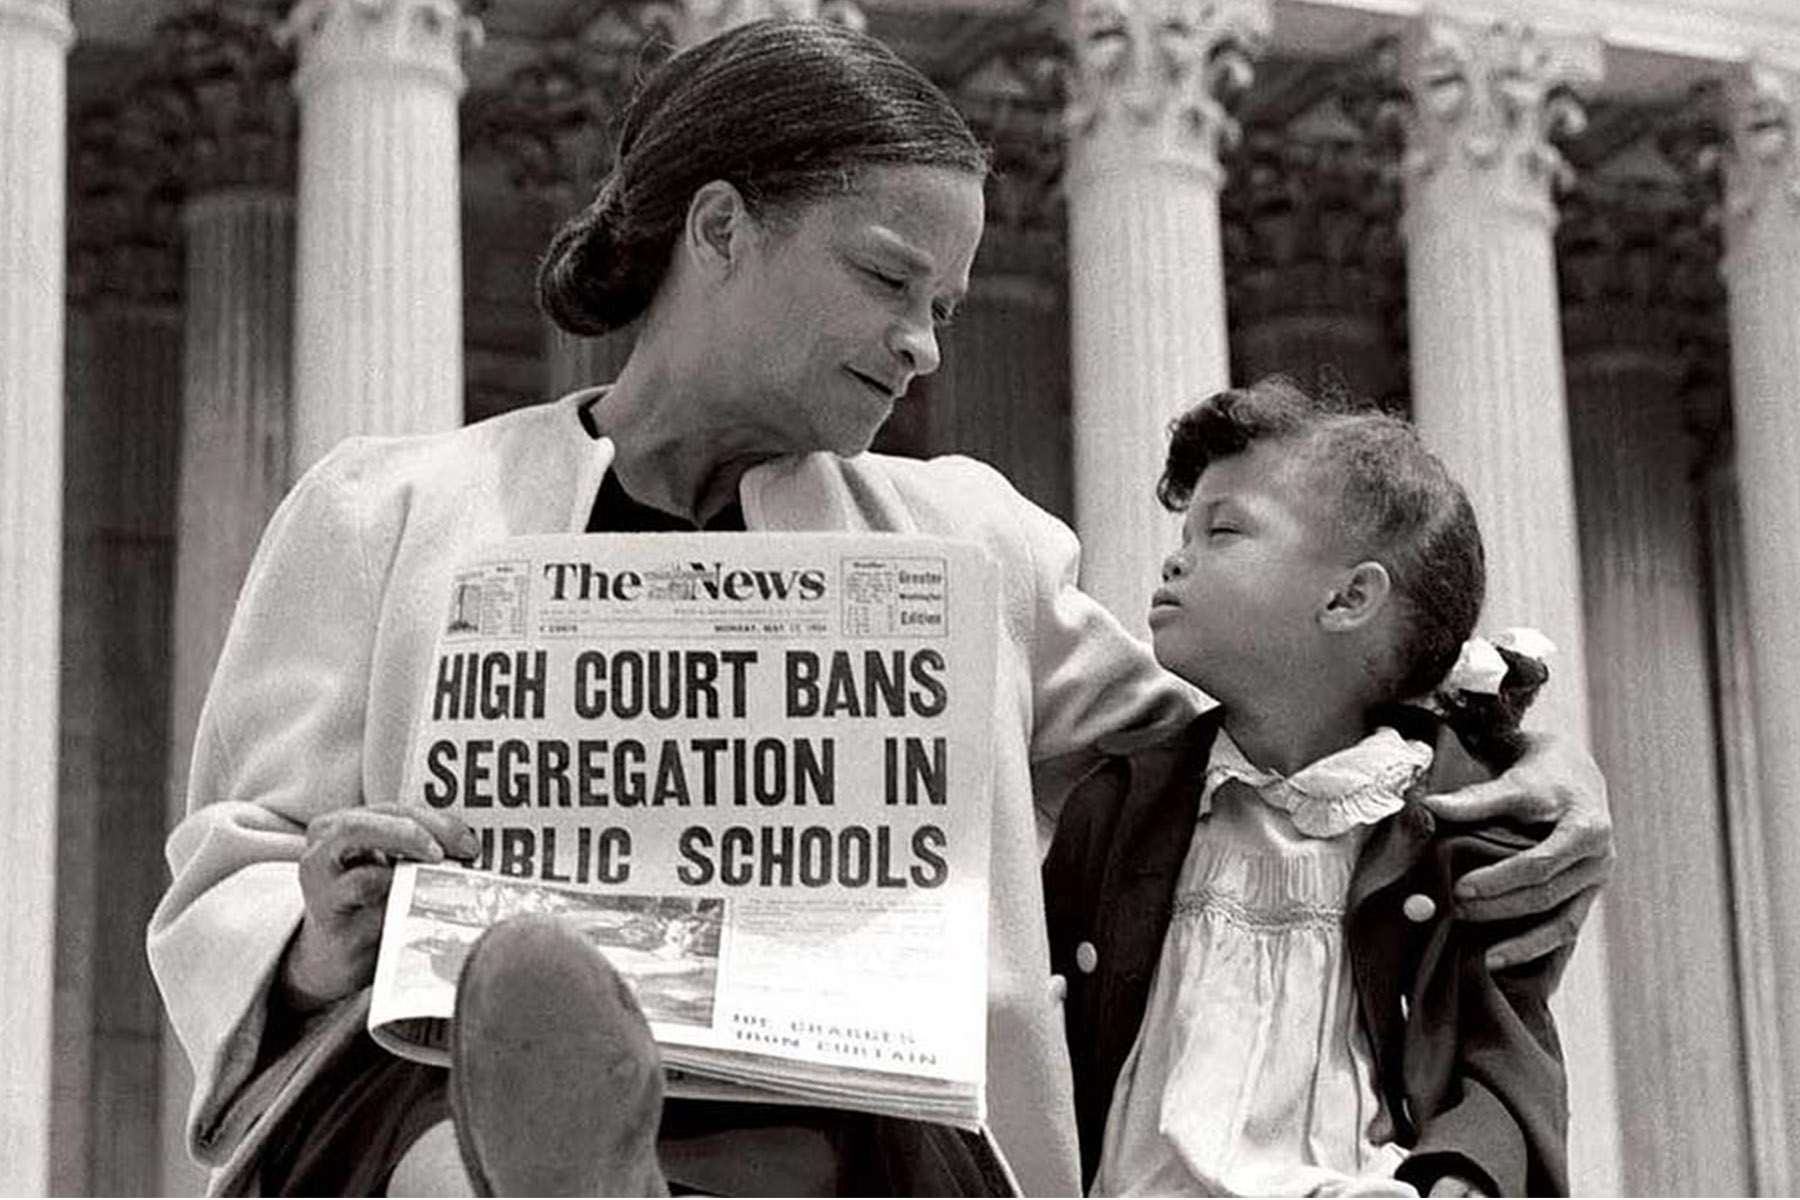 Nettie Hunt and her daughter, Nickie, sit on the U.S. Supreme Court steps on May 18, 1954, following the court's historic Brown v. Board of Education decision that banned segregation in public schools. (Photo courtesy Library of Congress)